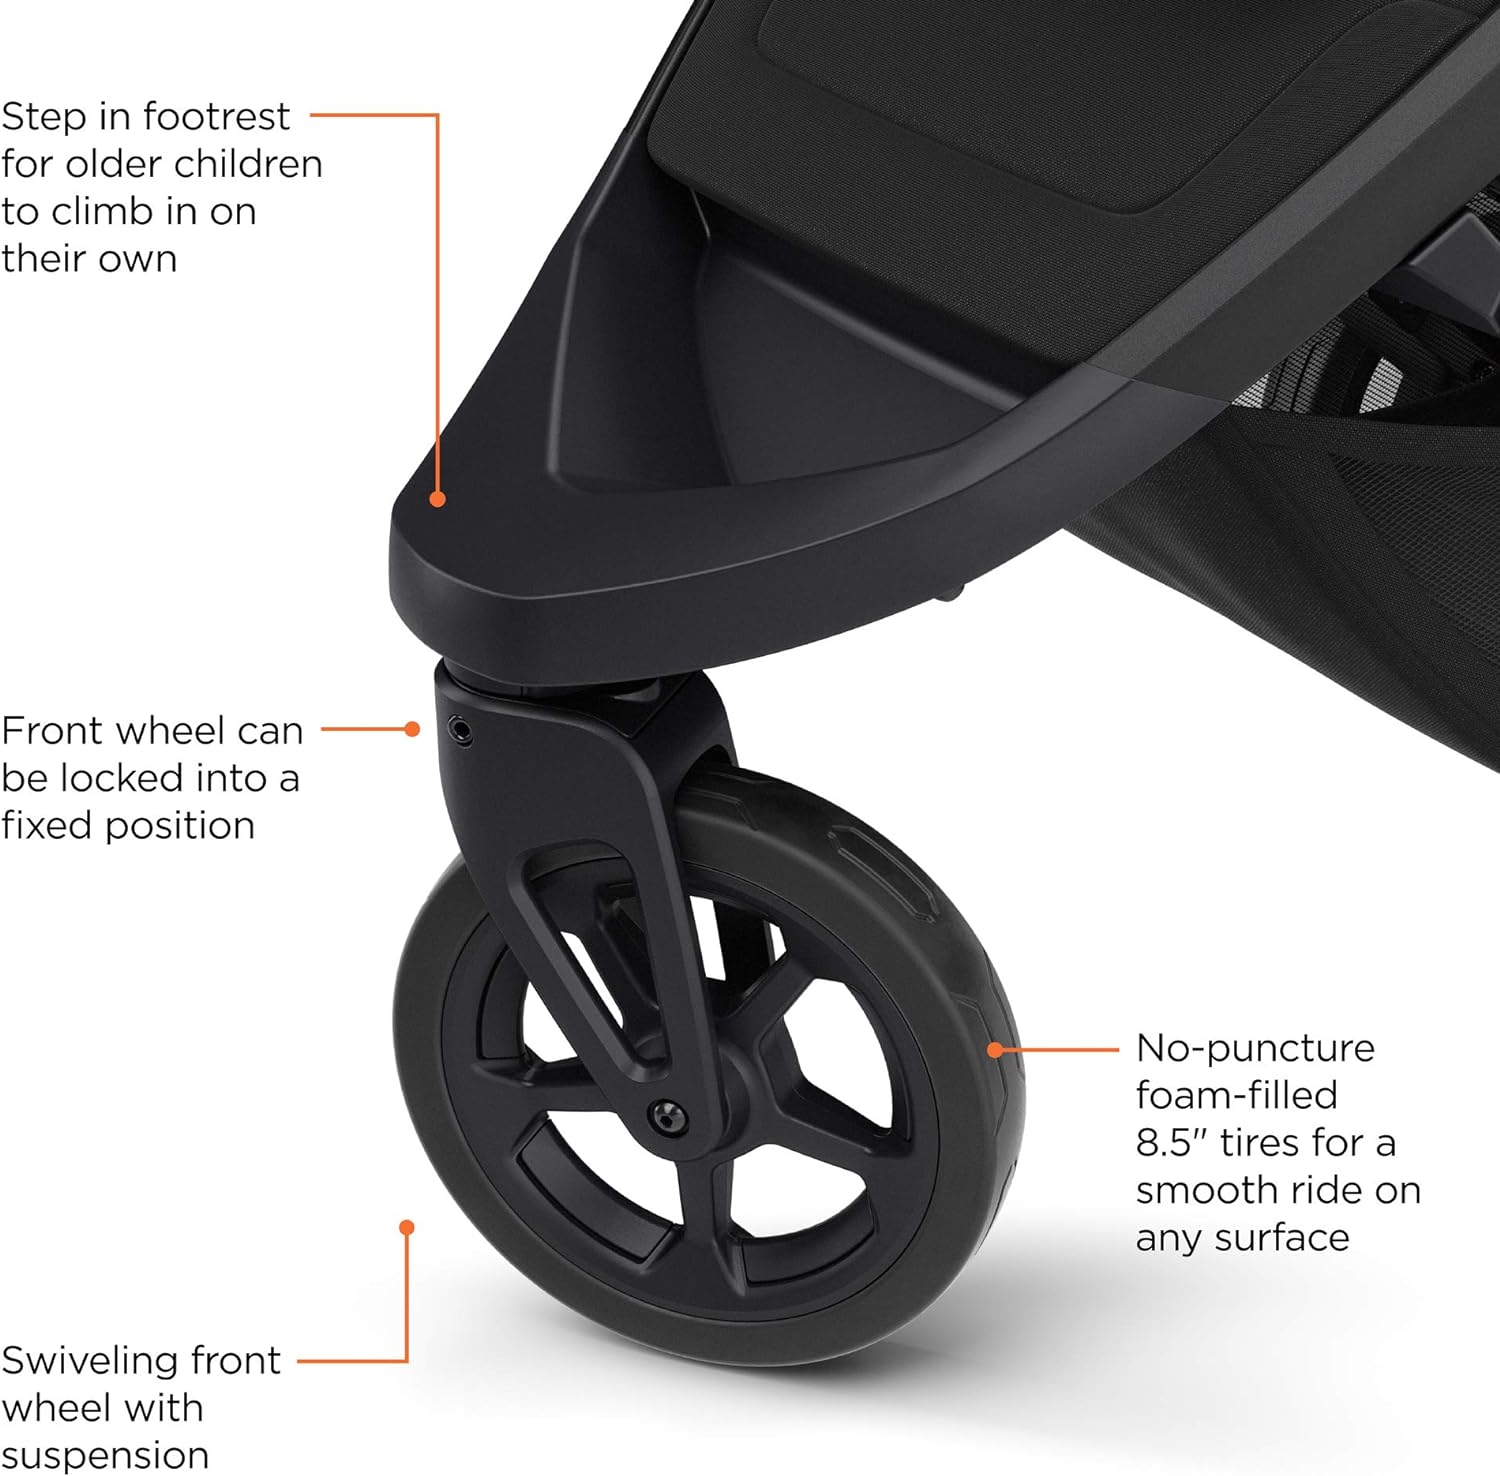 Thule Spring Compact Stroller - Thule Spring Compact Stroller Review